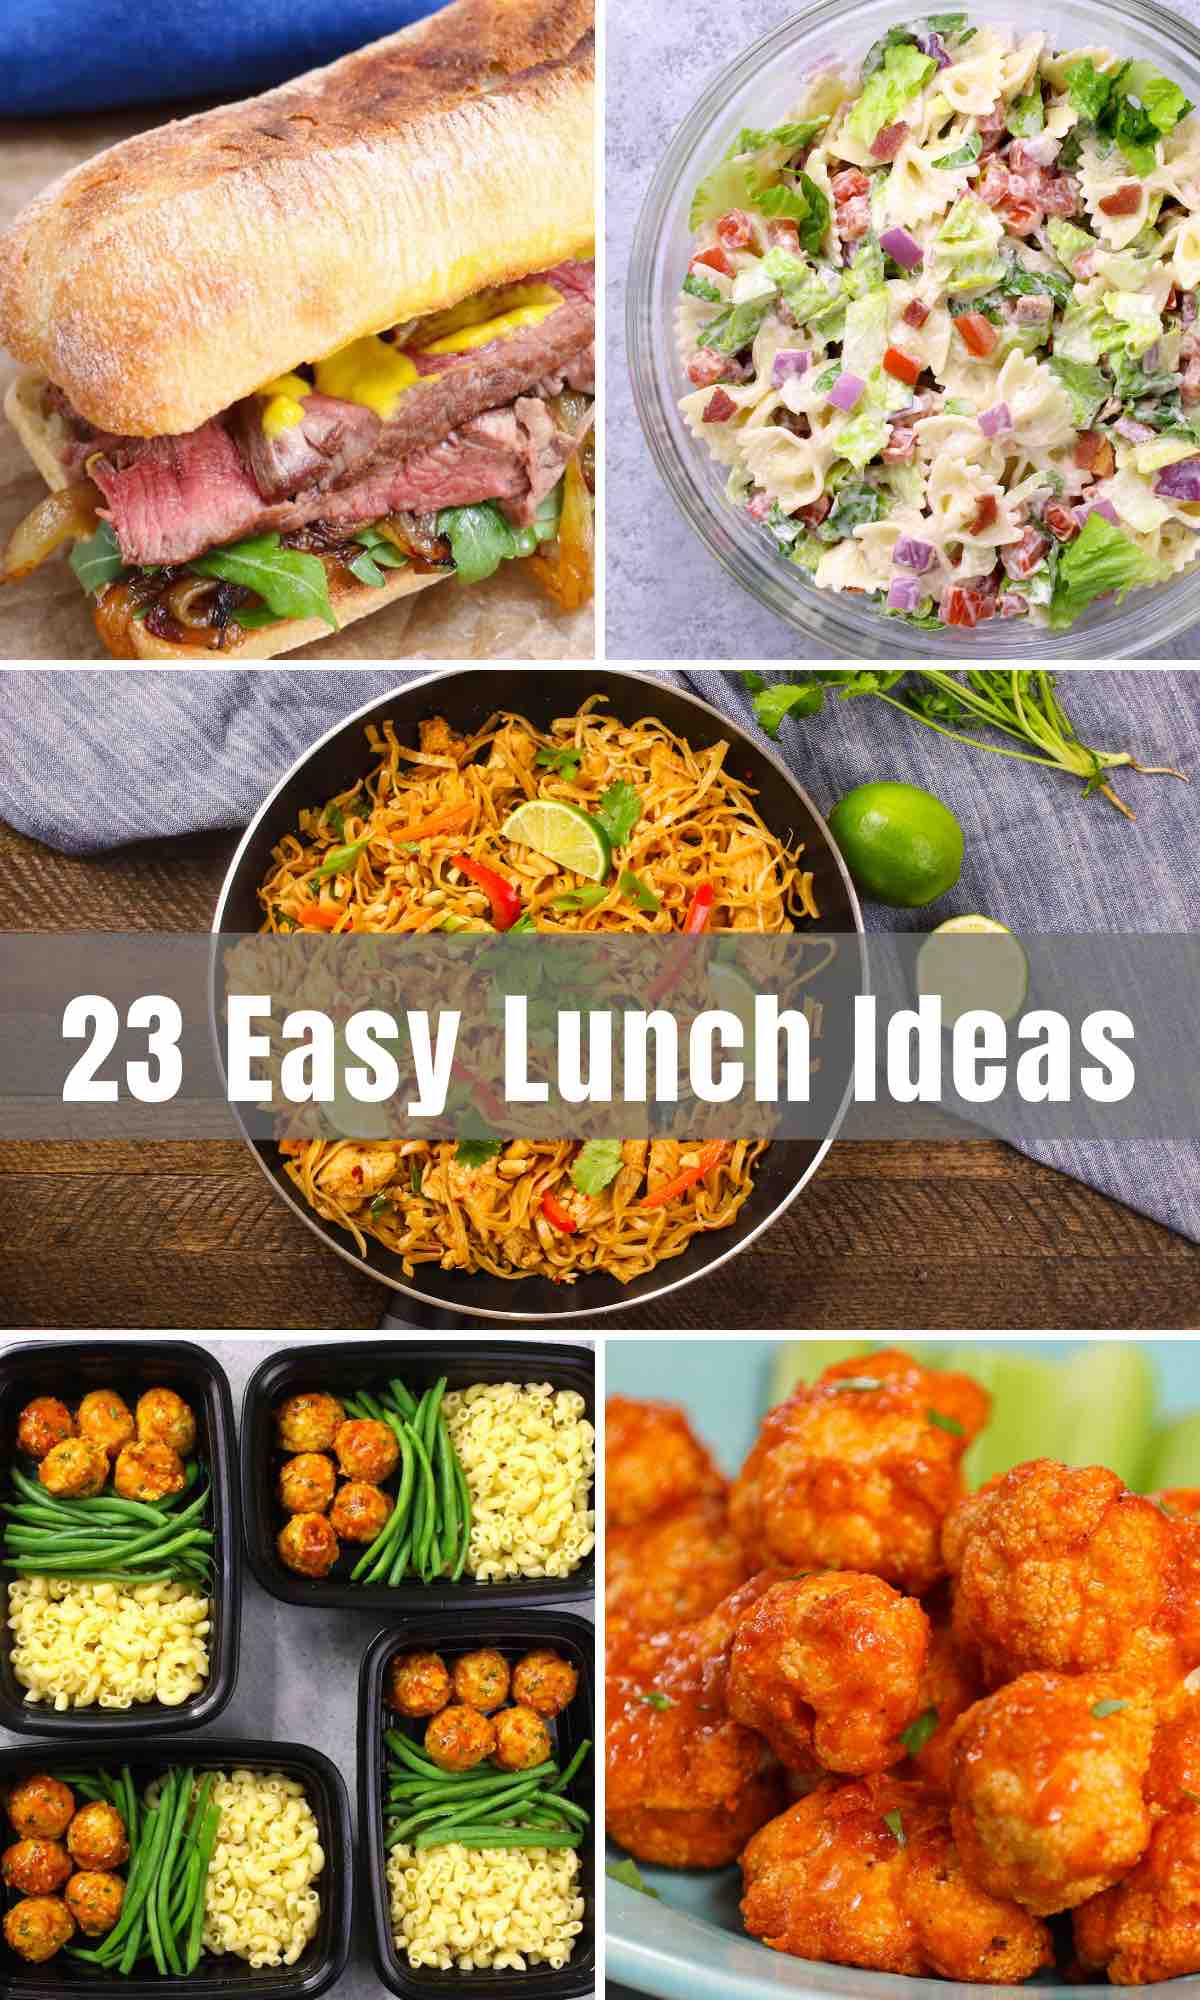 We've rounded up 23 Best and Easy Lunch Ideas! From healthy lunch recipes to lunch for the kids, to meal prep ideas - we’ve got you covered.